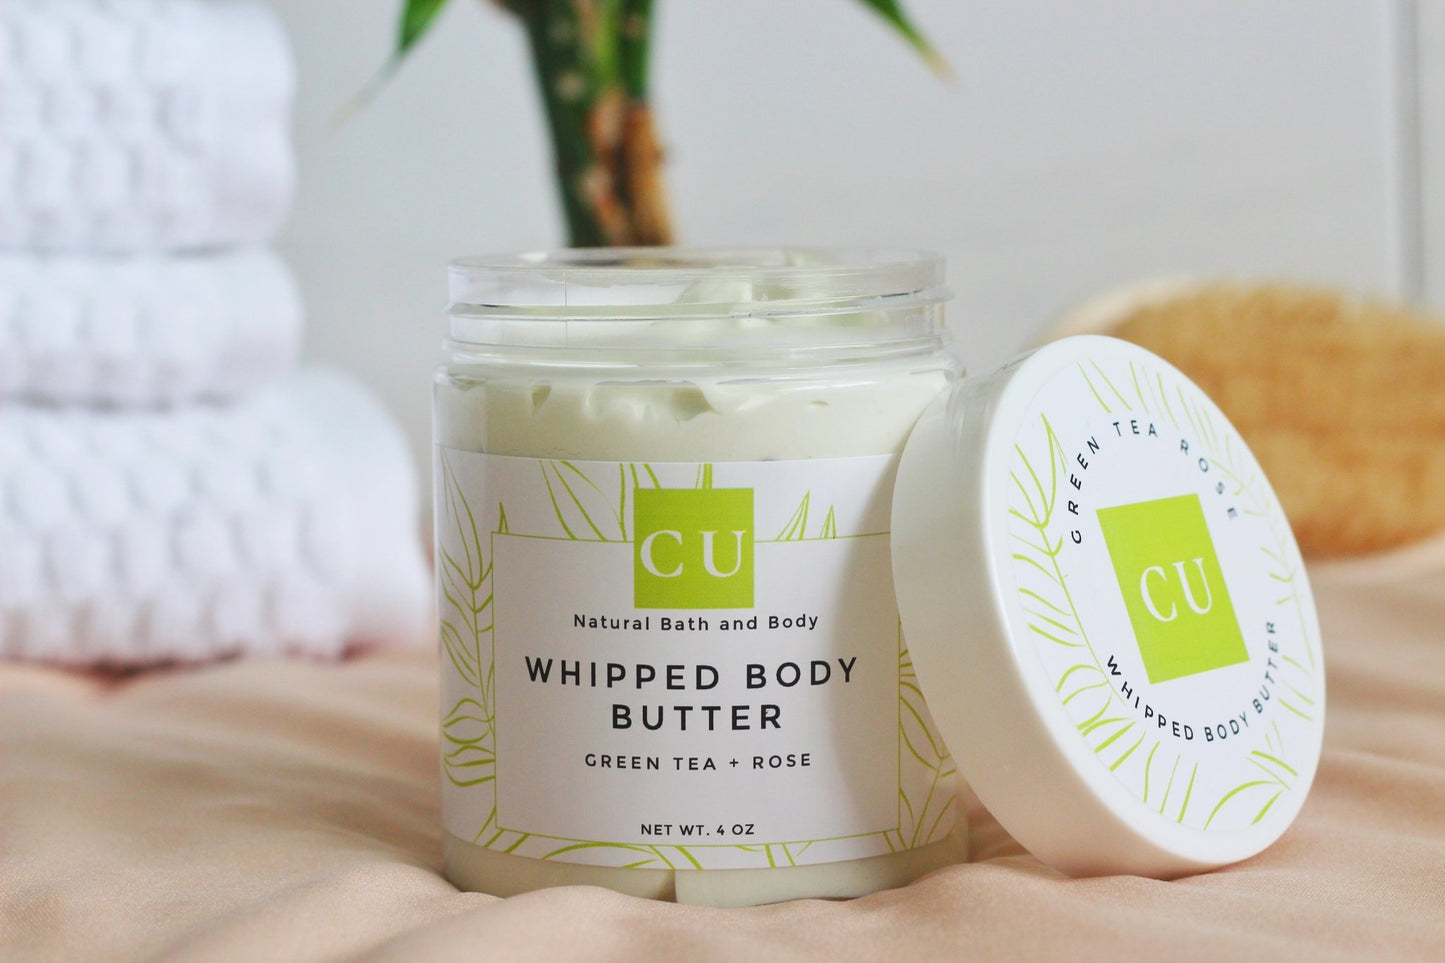 Green Tea and Rose scented body butter